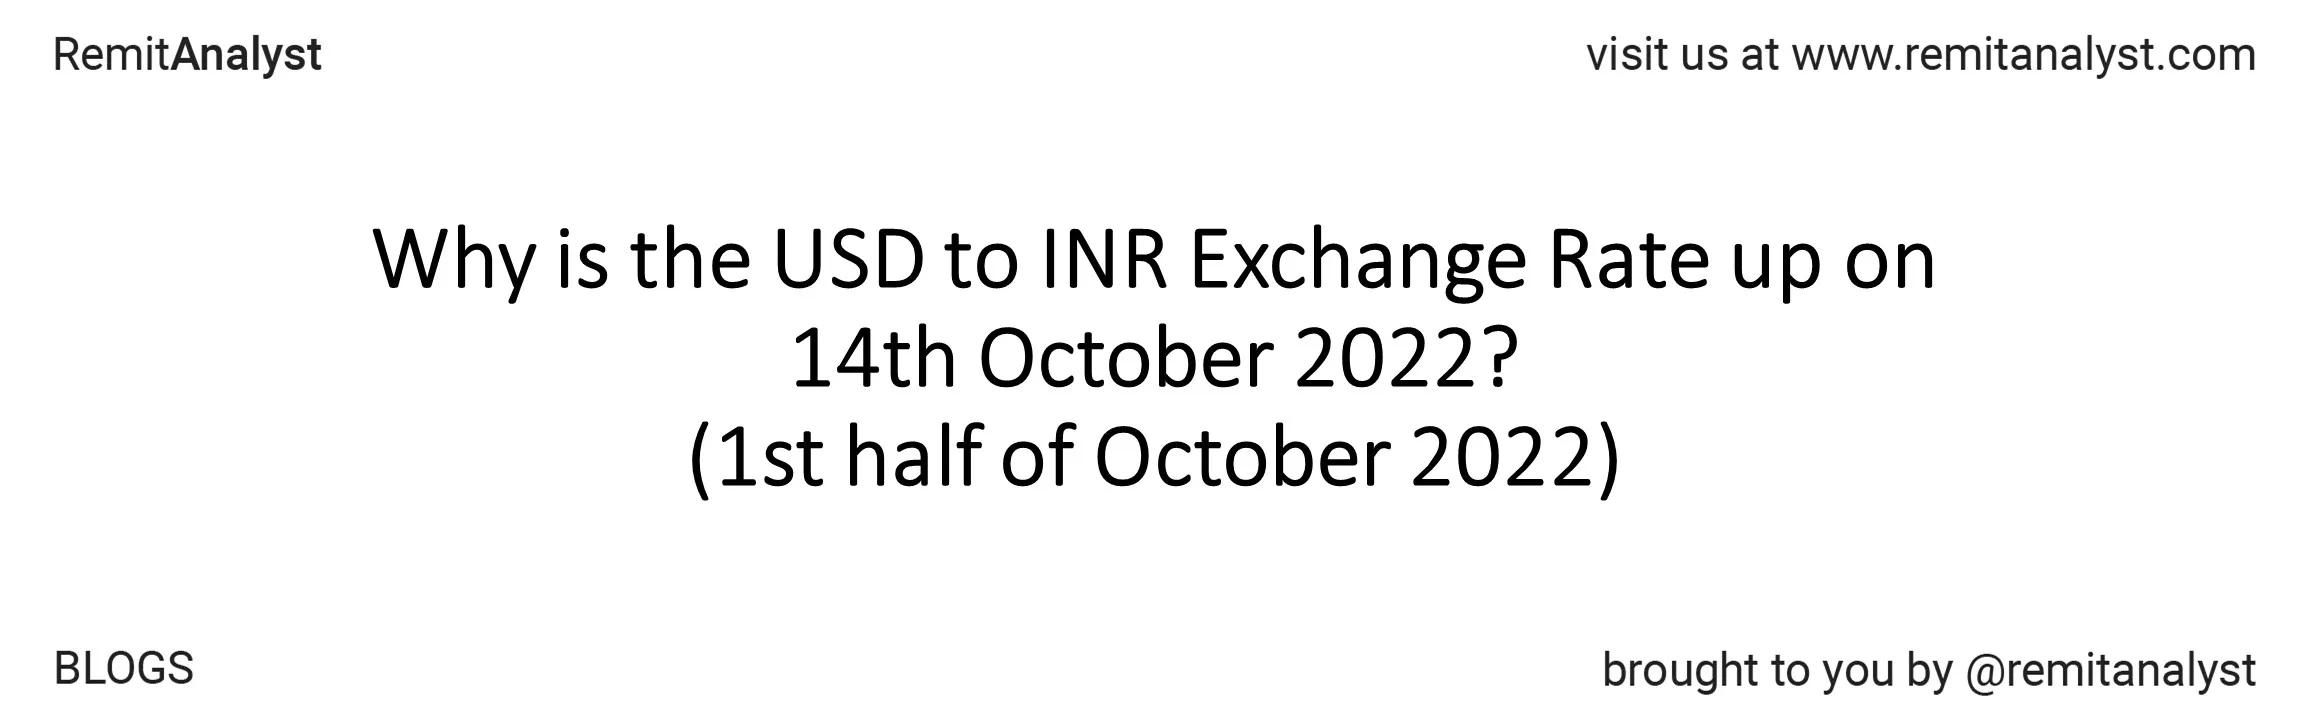 usd-to-inr-exchange-rate-3-oct-2022-to-14-oct-2022-title